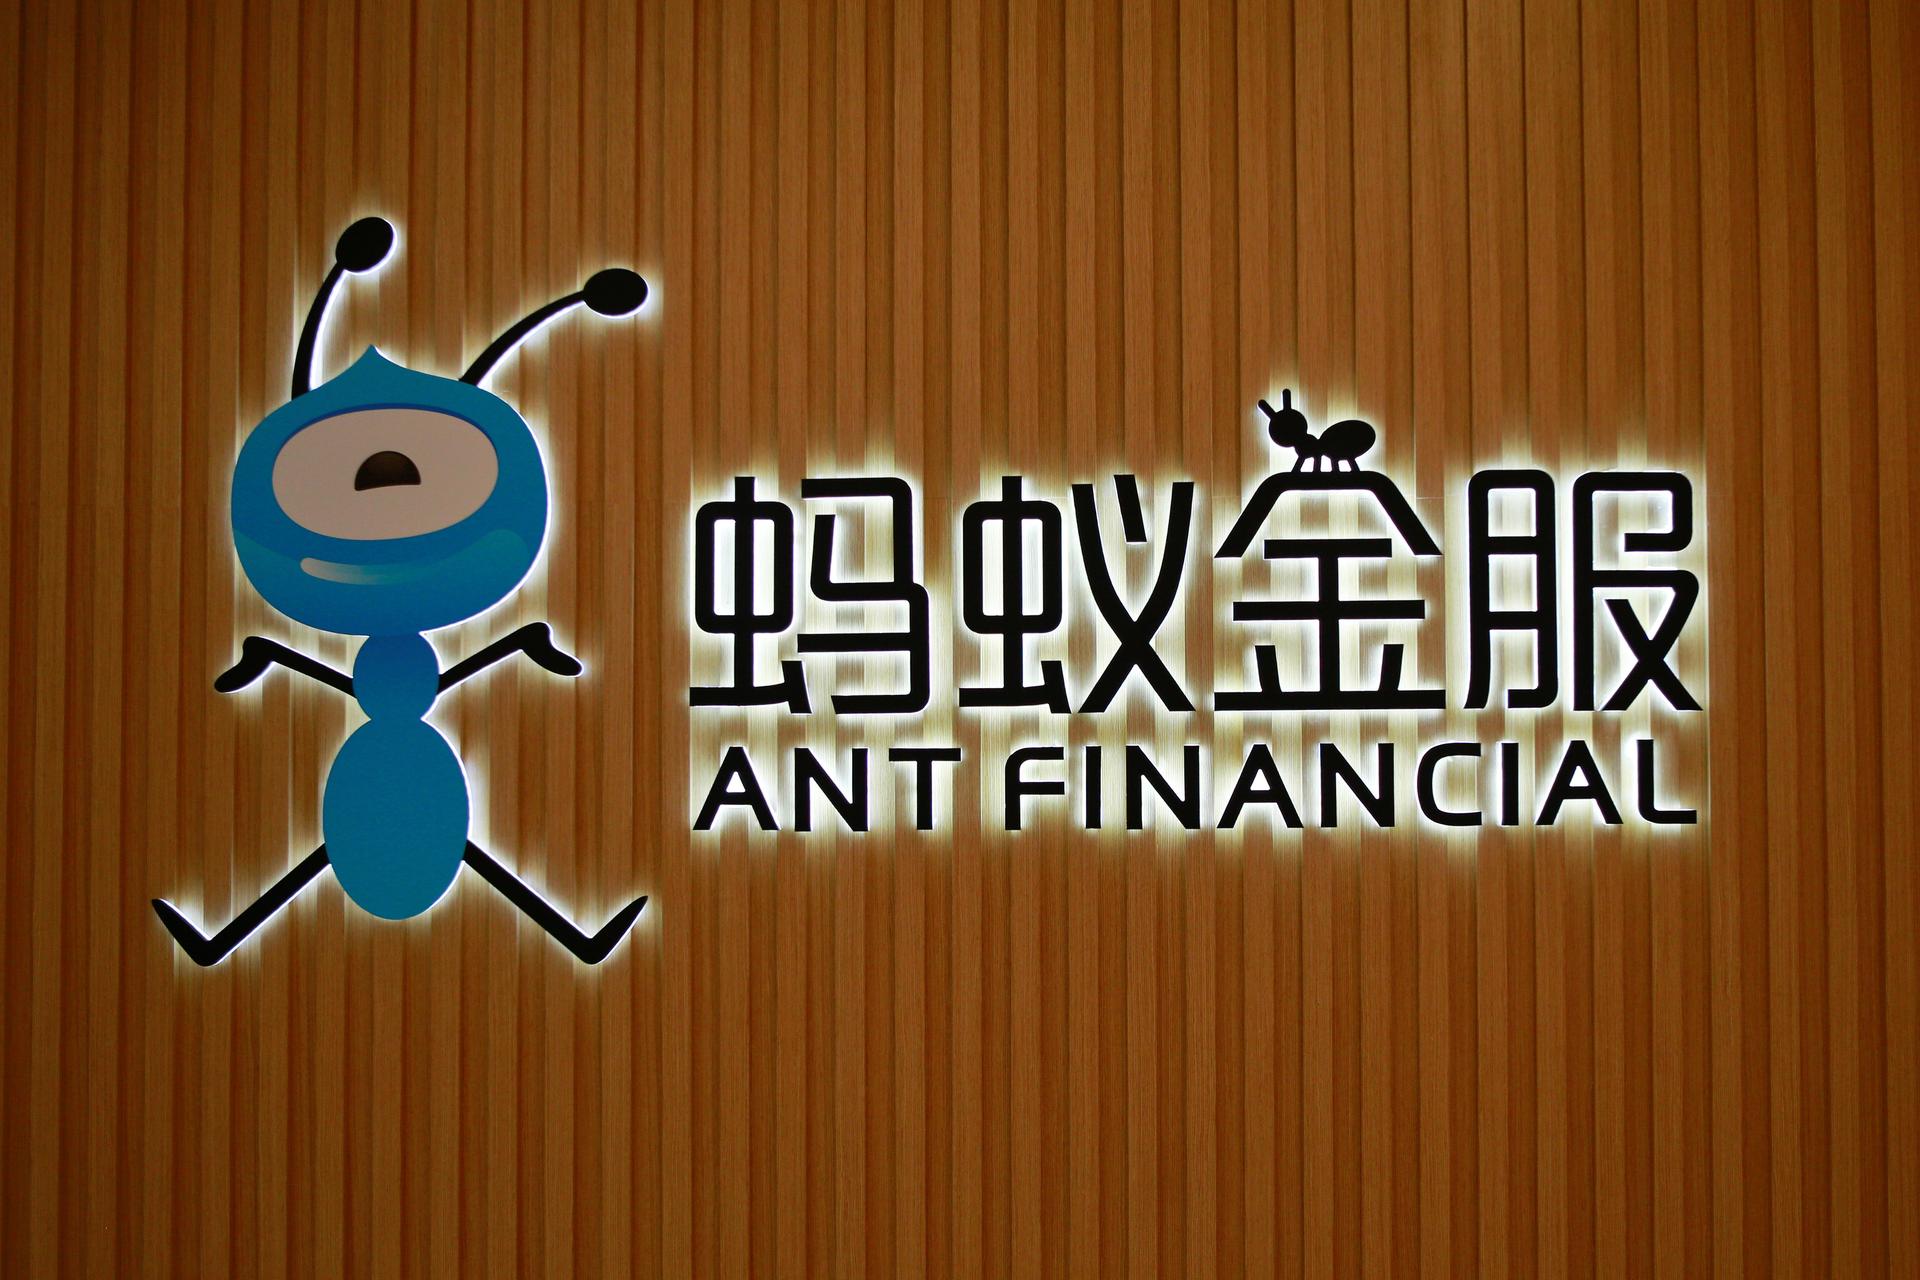 Exclusive: Ant Financial takes stake in Vietnam's eMonkey: sources